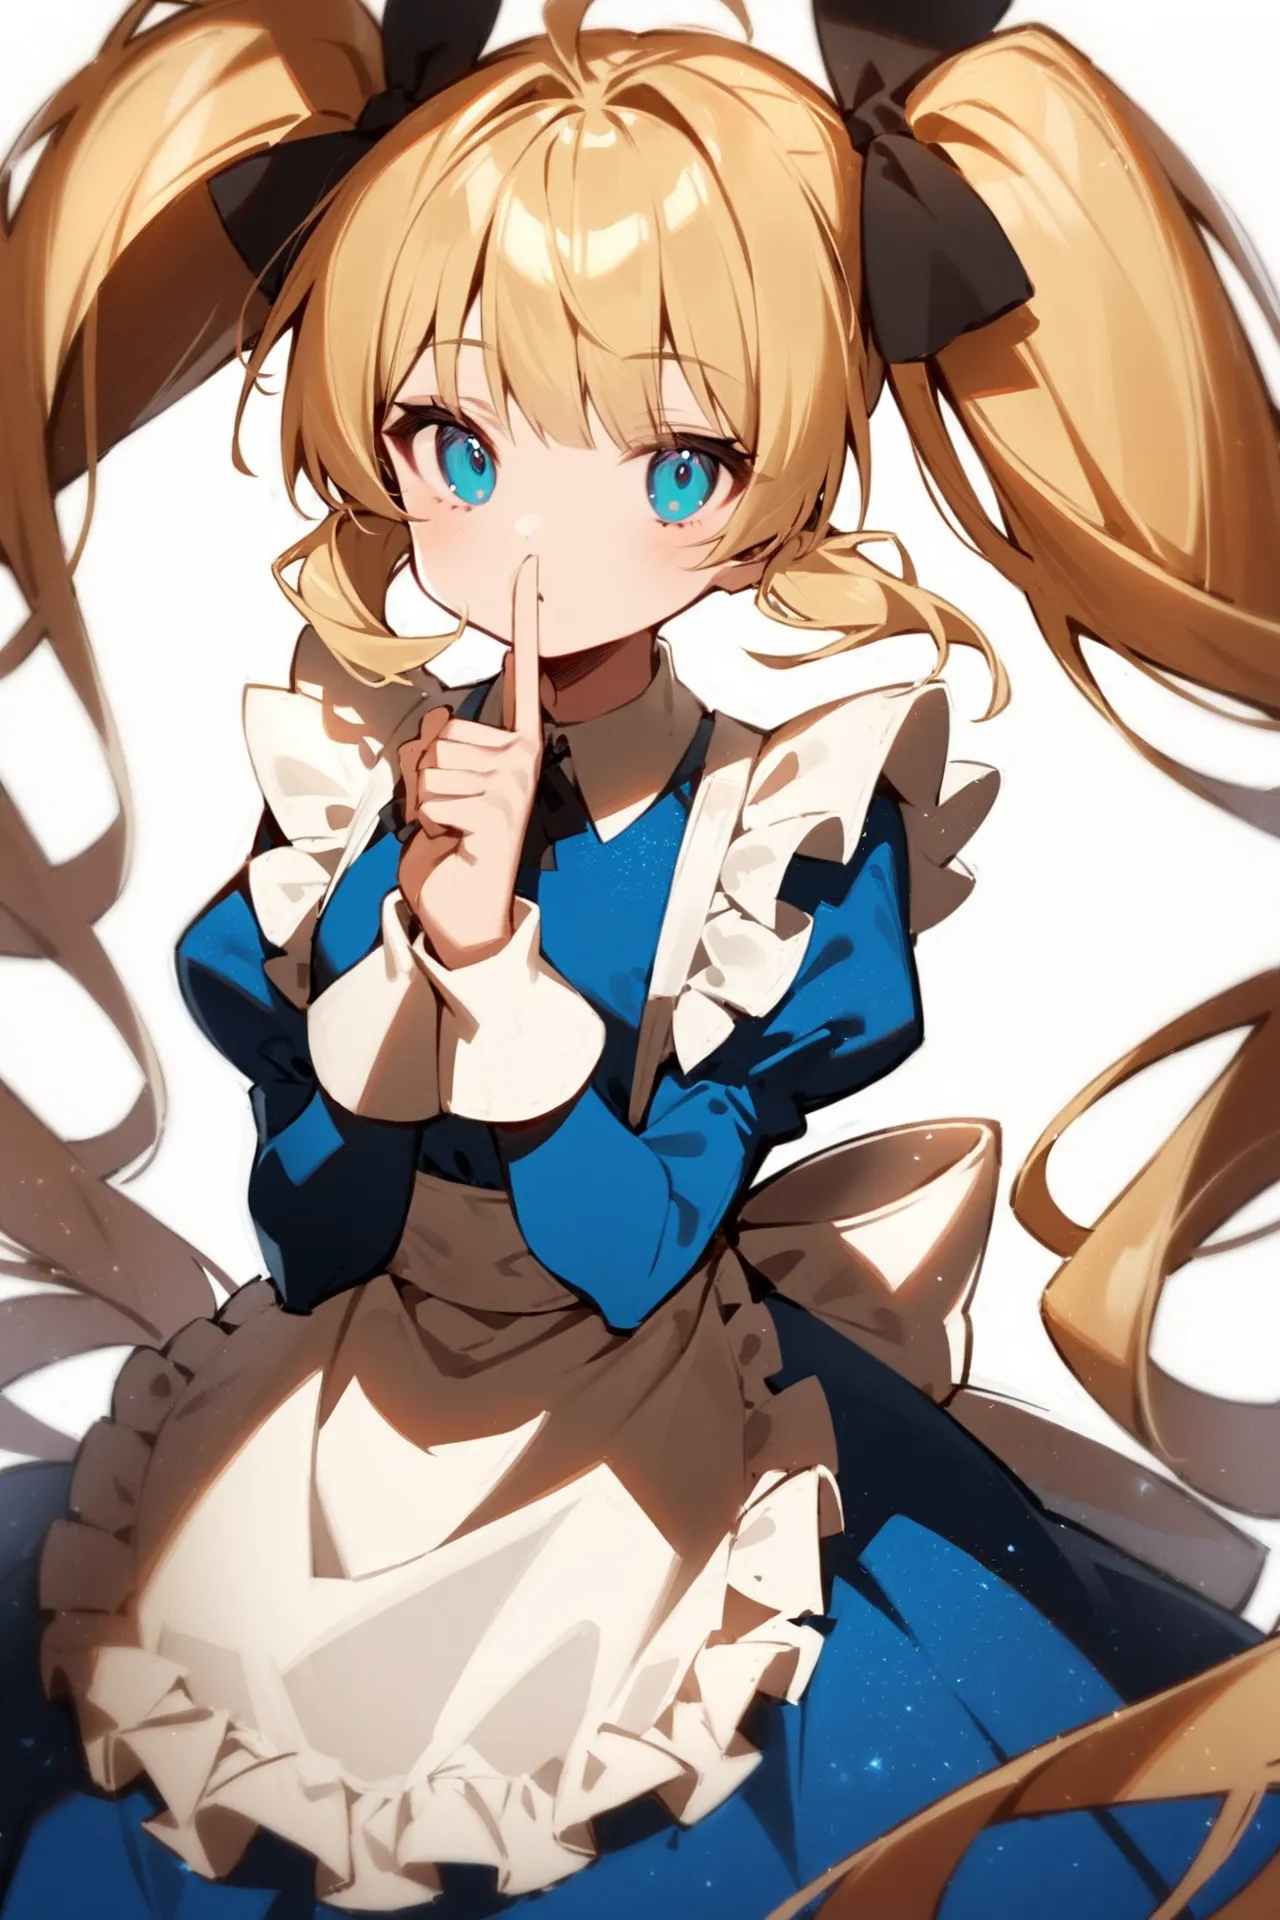 '1girl, shushing,\nblonde hair, twintails, blue dress, white apron,\nwhite background,\nAlice in glitterworld\nNegative prompt: (worst quality, low quality:1.4), nsfw\nSteps: 35, Sampler: DPM++ 2M SDE Karras, CFG scale: 7, Seed: 1, Size: 640x960, Model hash: 642b08ca49, Model: ConfusionXL2.0_fp16_vae, VAE hash: 63aeecb90f, VAE: sdxl_vae_0.9.safetensors, Denoising strength: 0.6, Clip skip: 2, Hires upscale: 2, Hires steps: 15, Hires upscaler: ESRGAN_4x, Eta: 0.68, Version: v1.7.0'